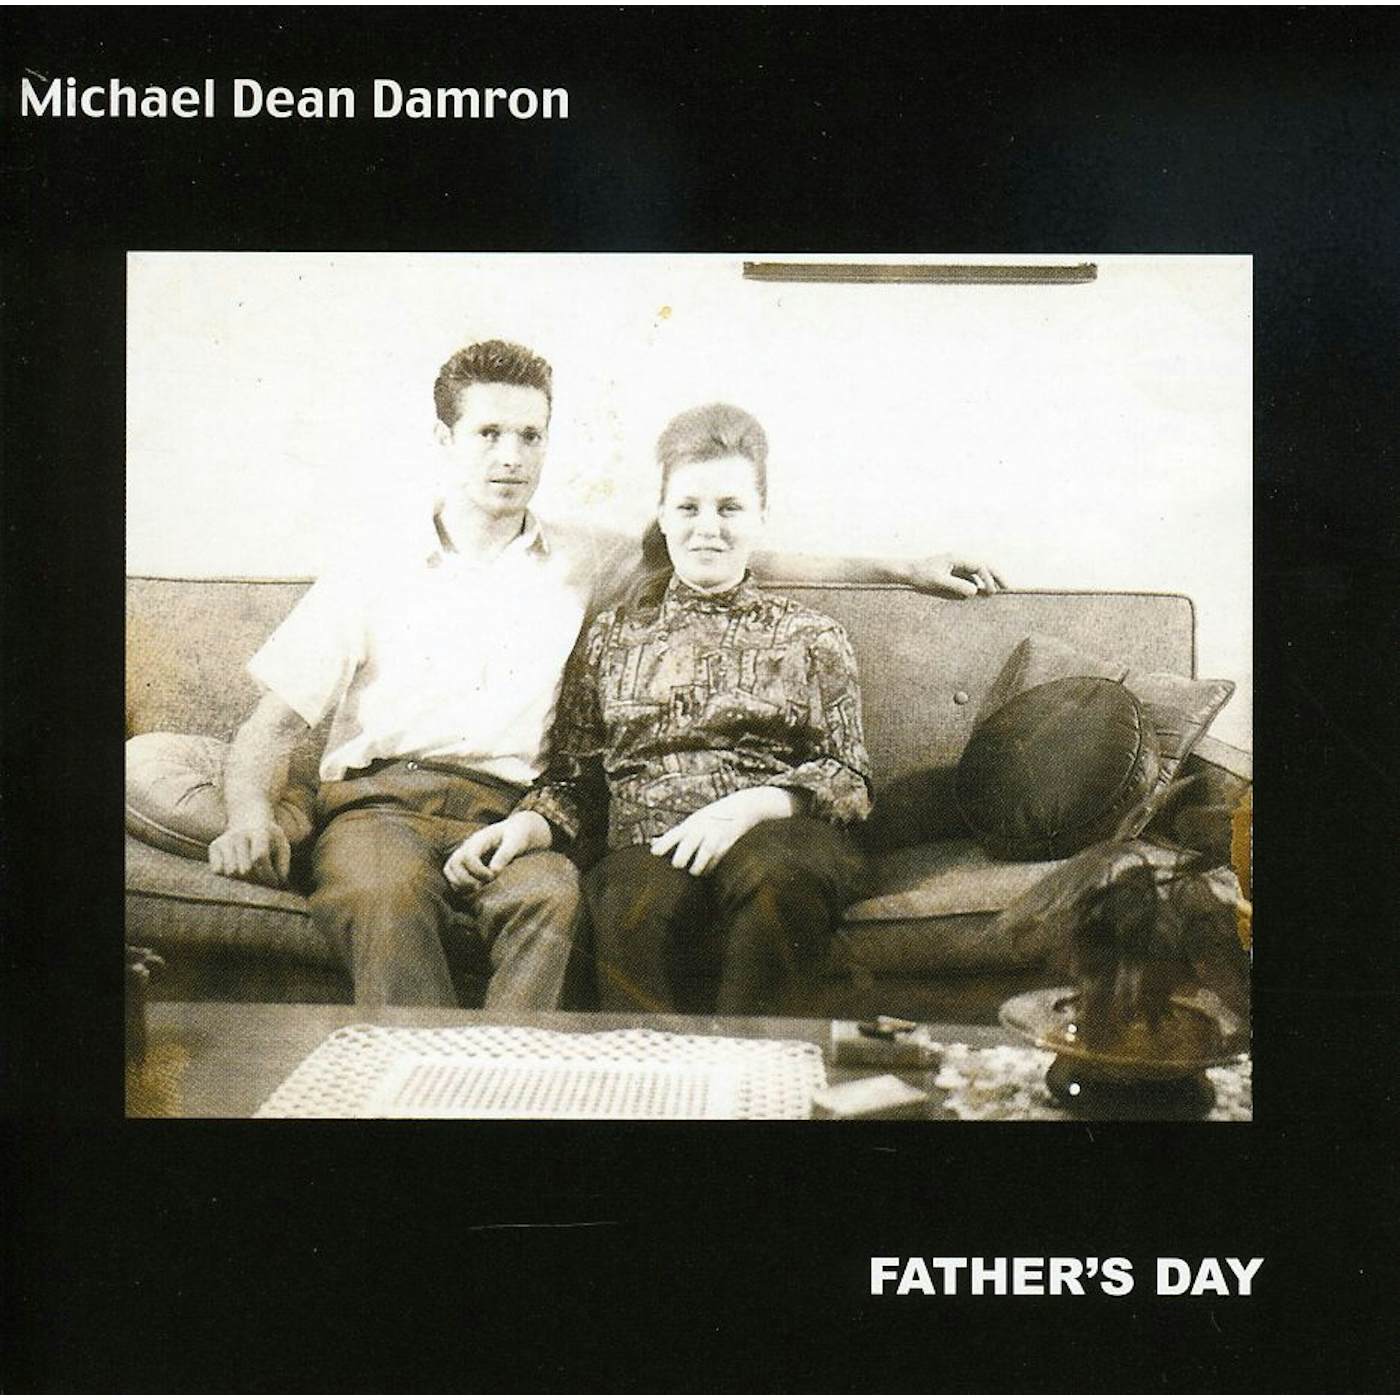 Michael Dean Damron FATHER'S DAY CD